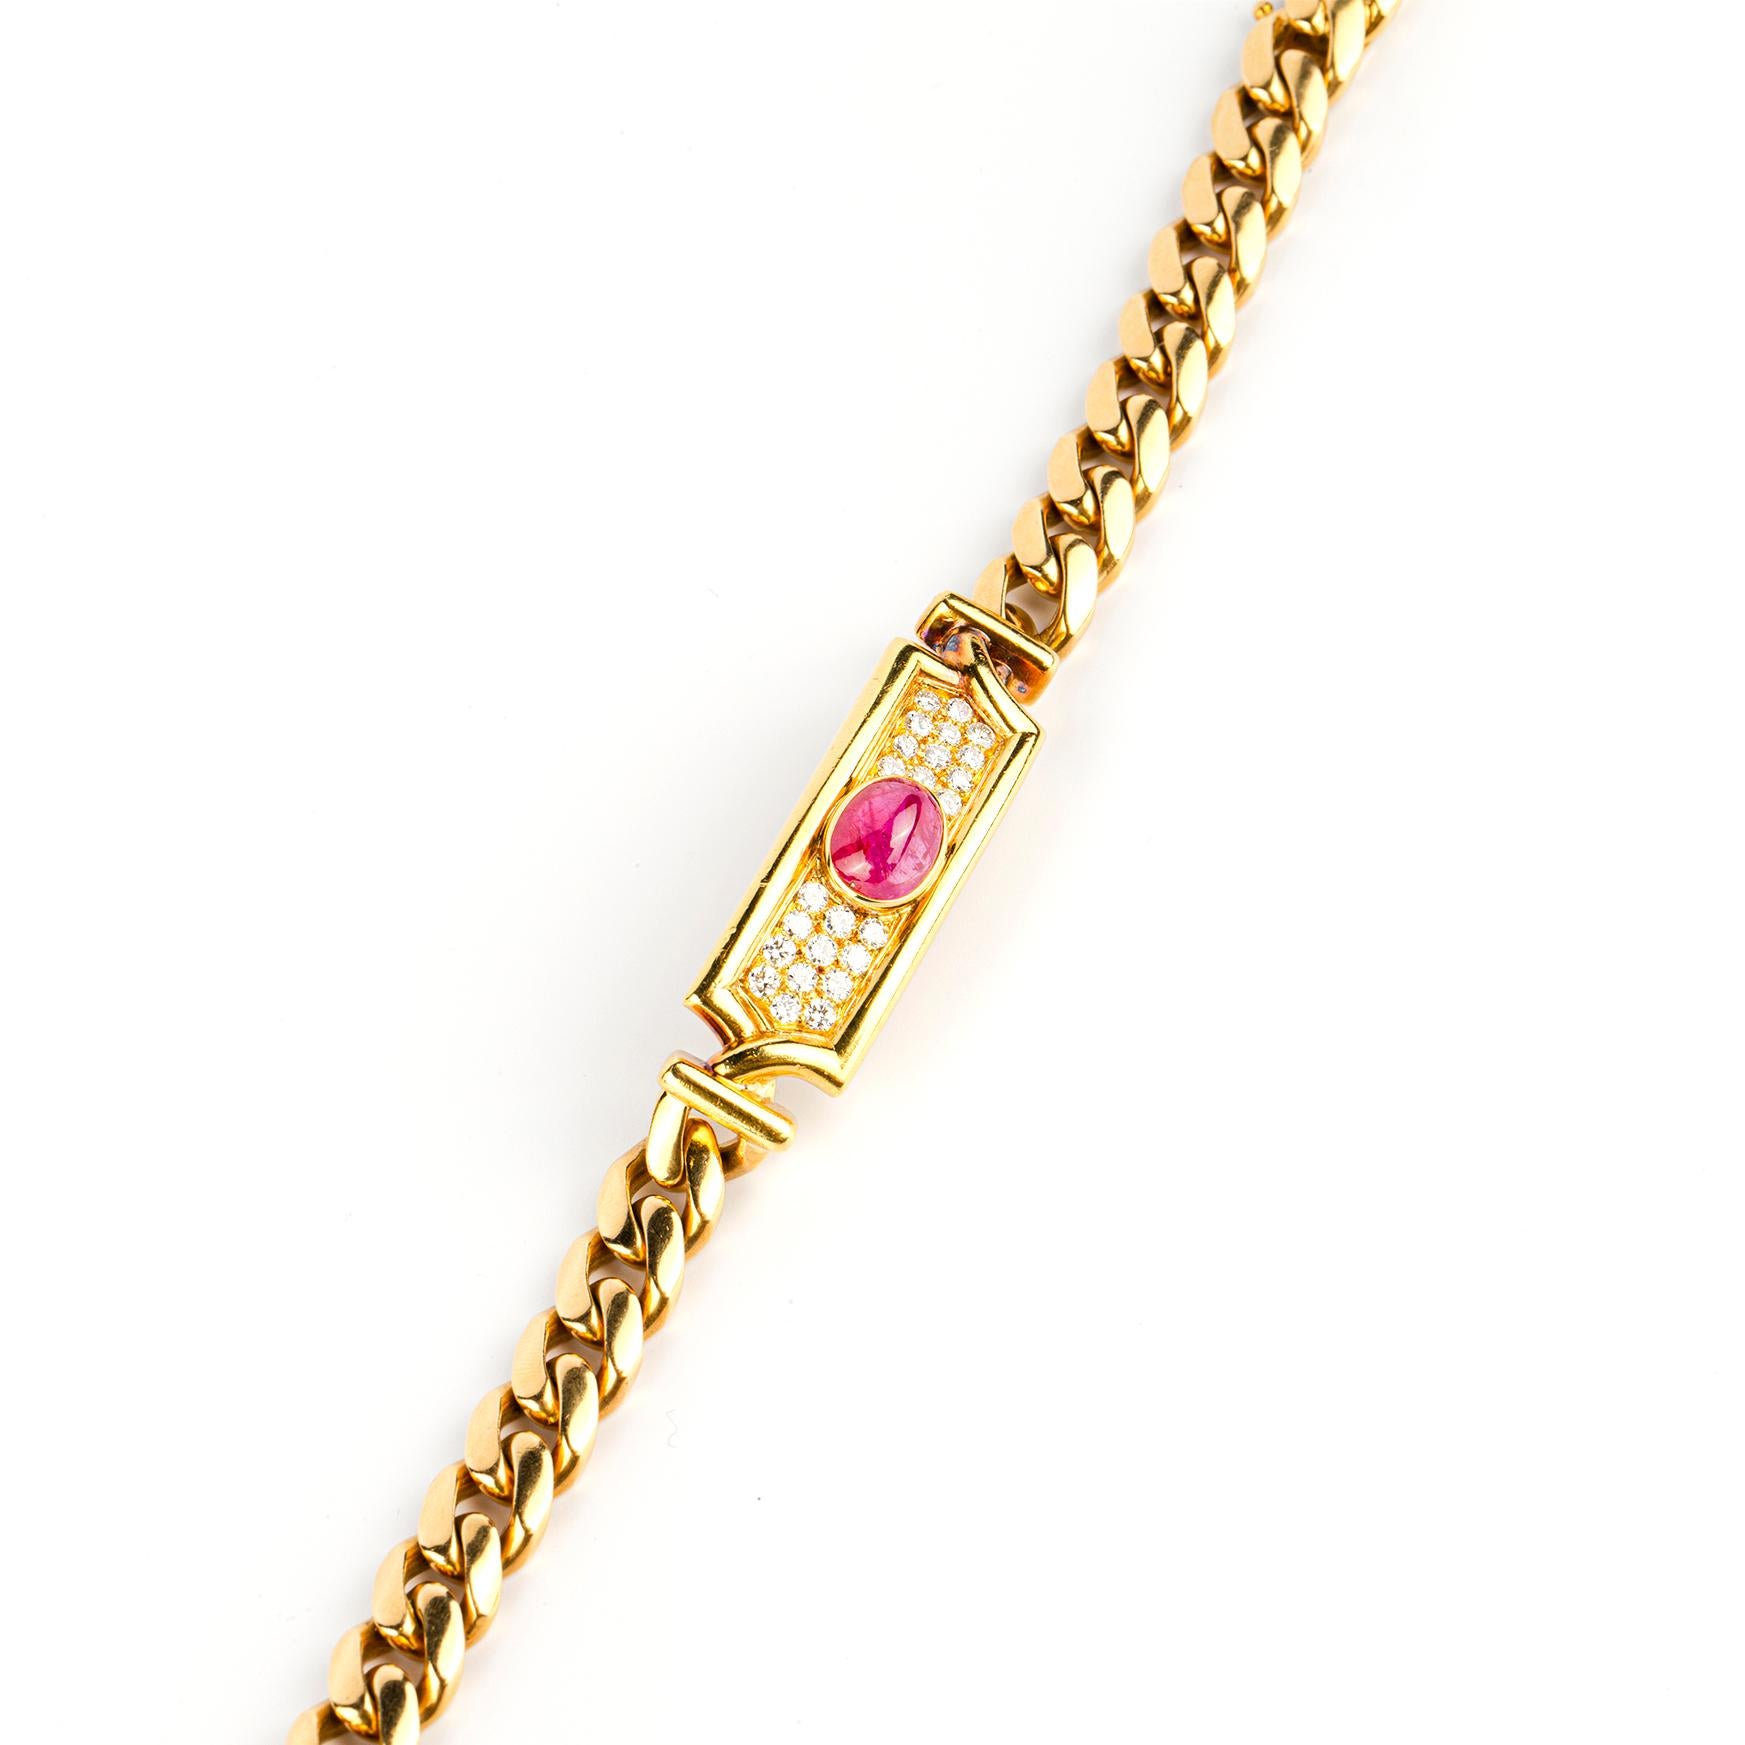 Bulgari bracelet in 18k yellow gold centered by a cabochon ruby plaque with diamond accents. Made in Italy, circa 1980.